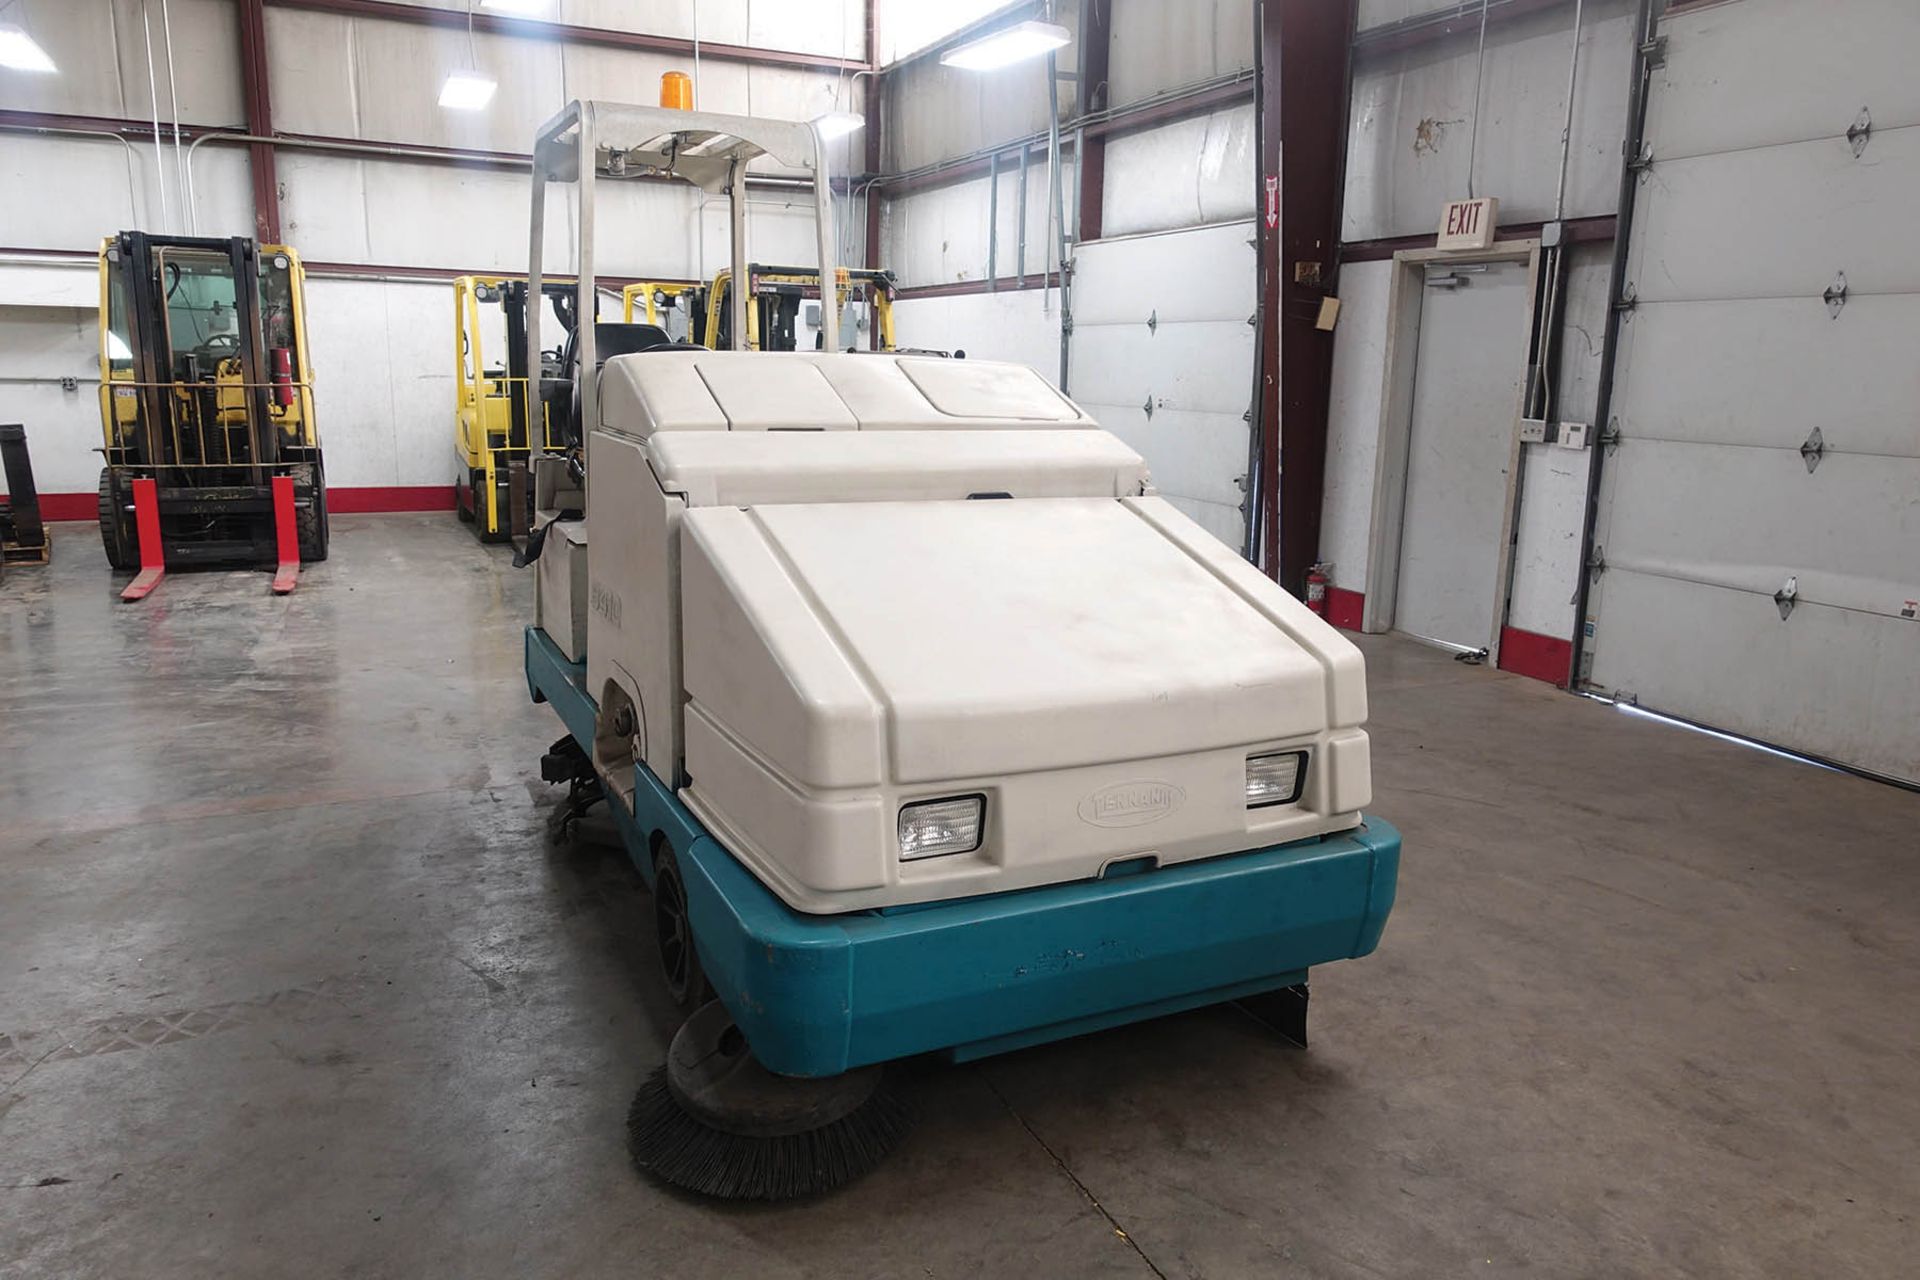 TENNANT SWEEPER/SCRUBBER; MODEL 8410, S/N 8410-14163, LPG, WEIGHT 7,000 LB., 60'' SWEEPING PATH, 2- - Image 2 of 5